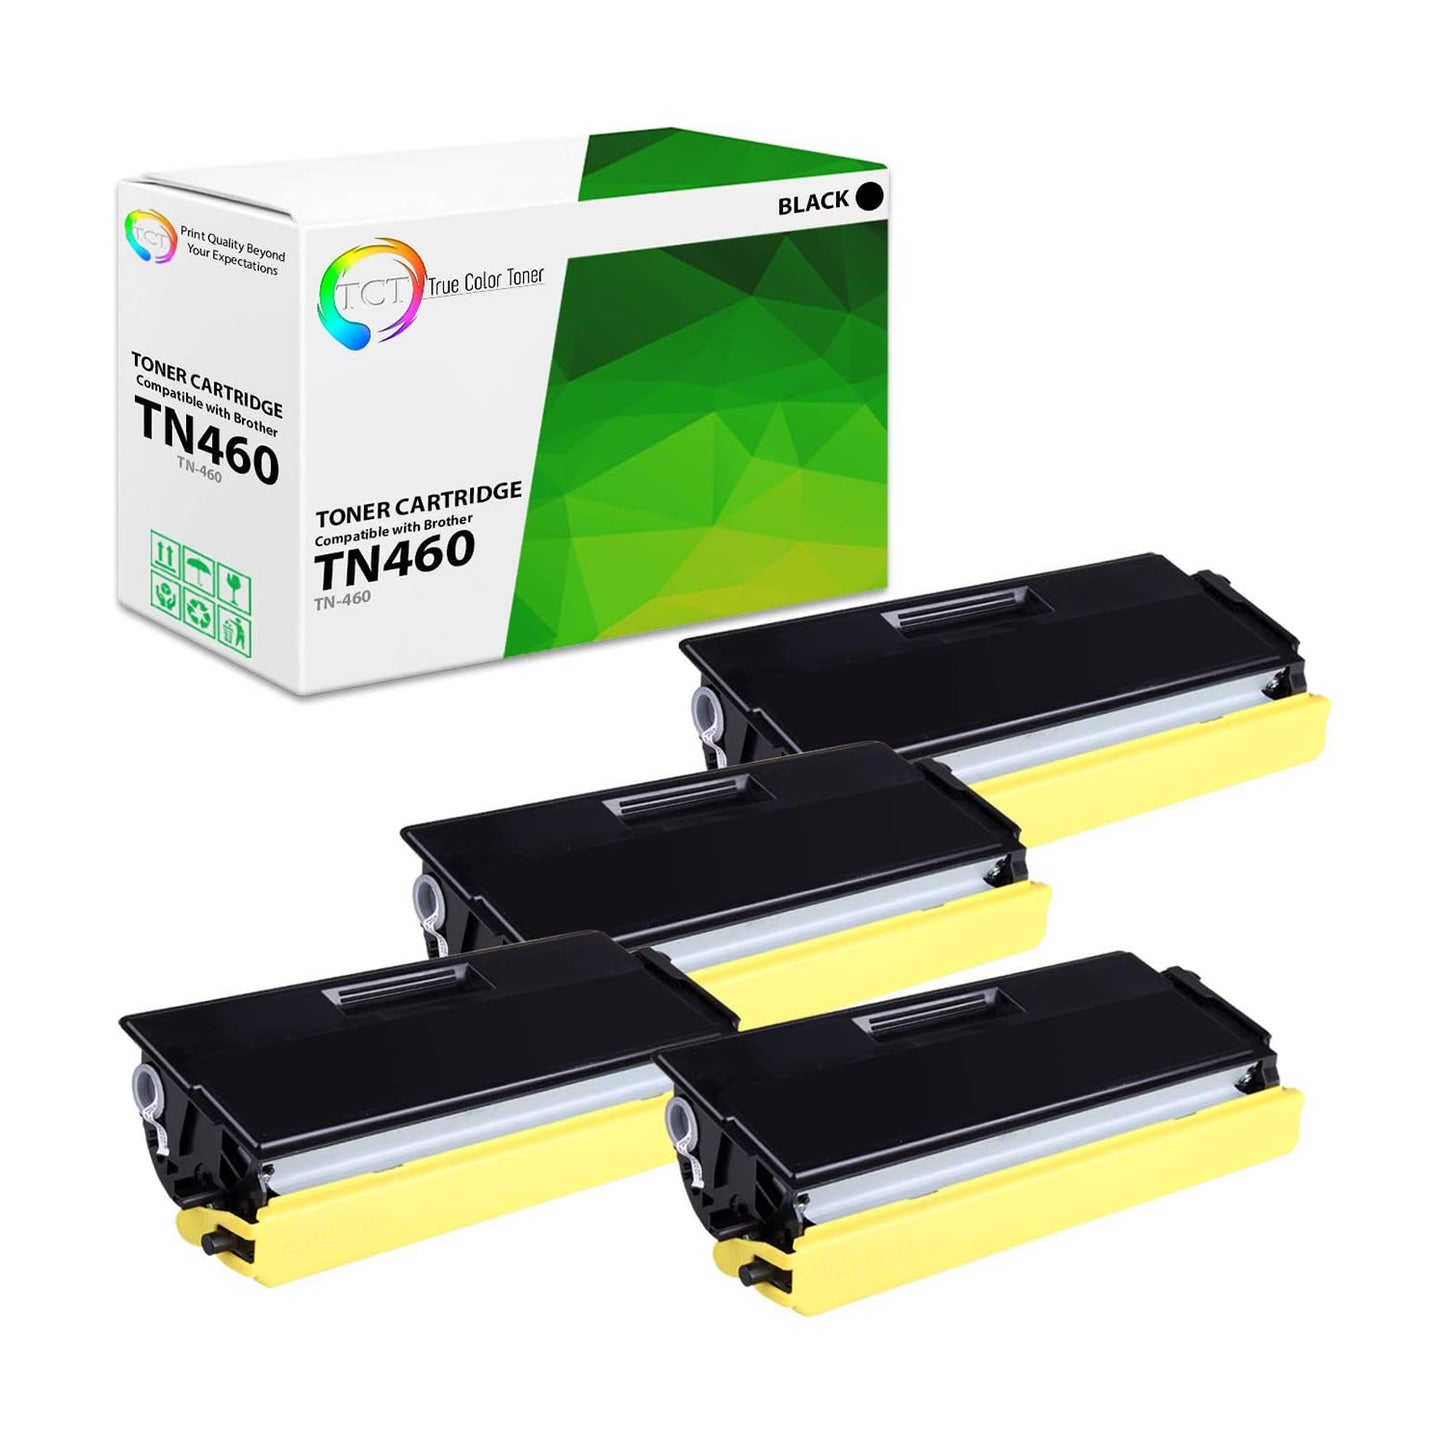 TCT Compatible High Yield Toner Cartridge Replacement for the Brother TN460 Series - 4 Pack Black